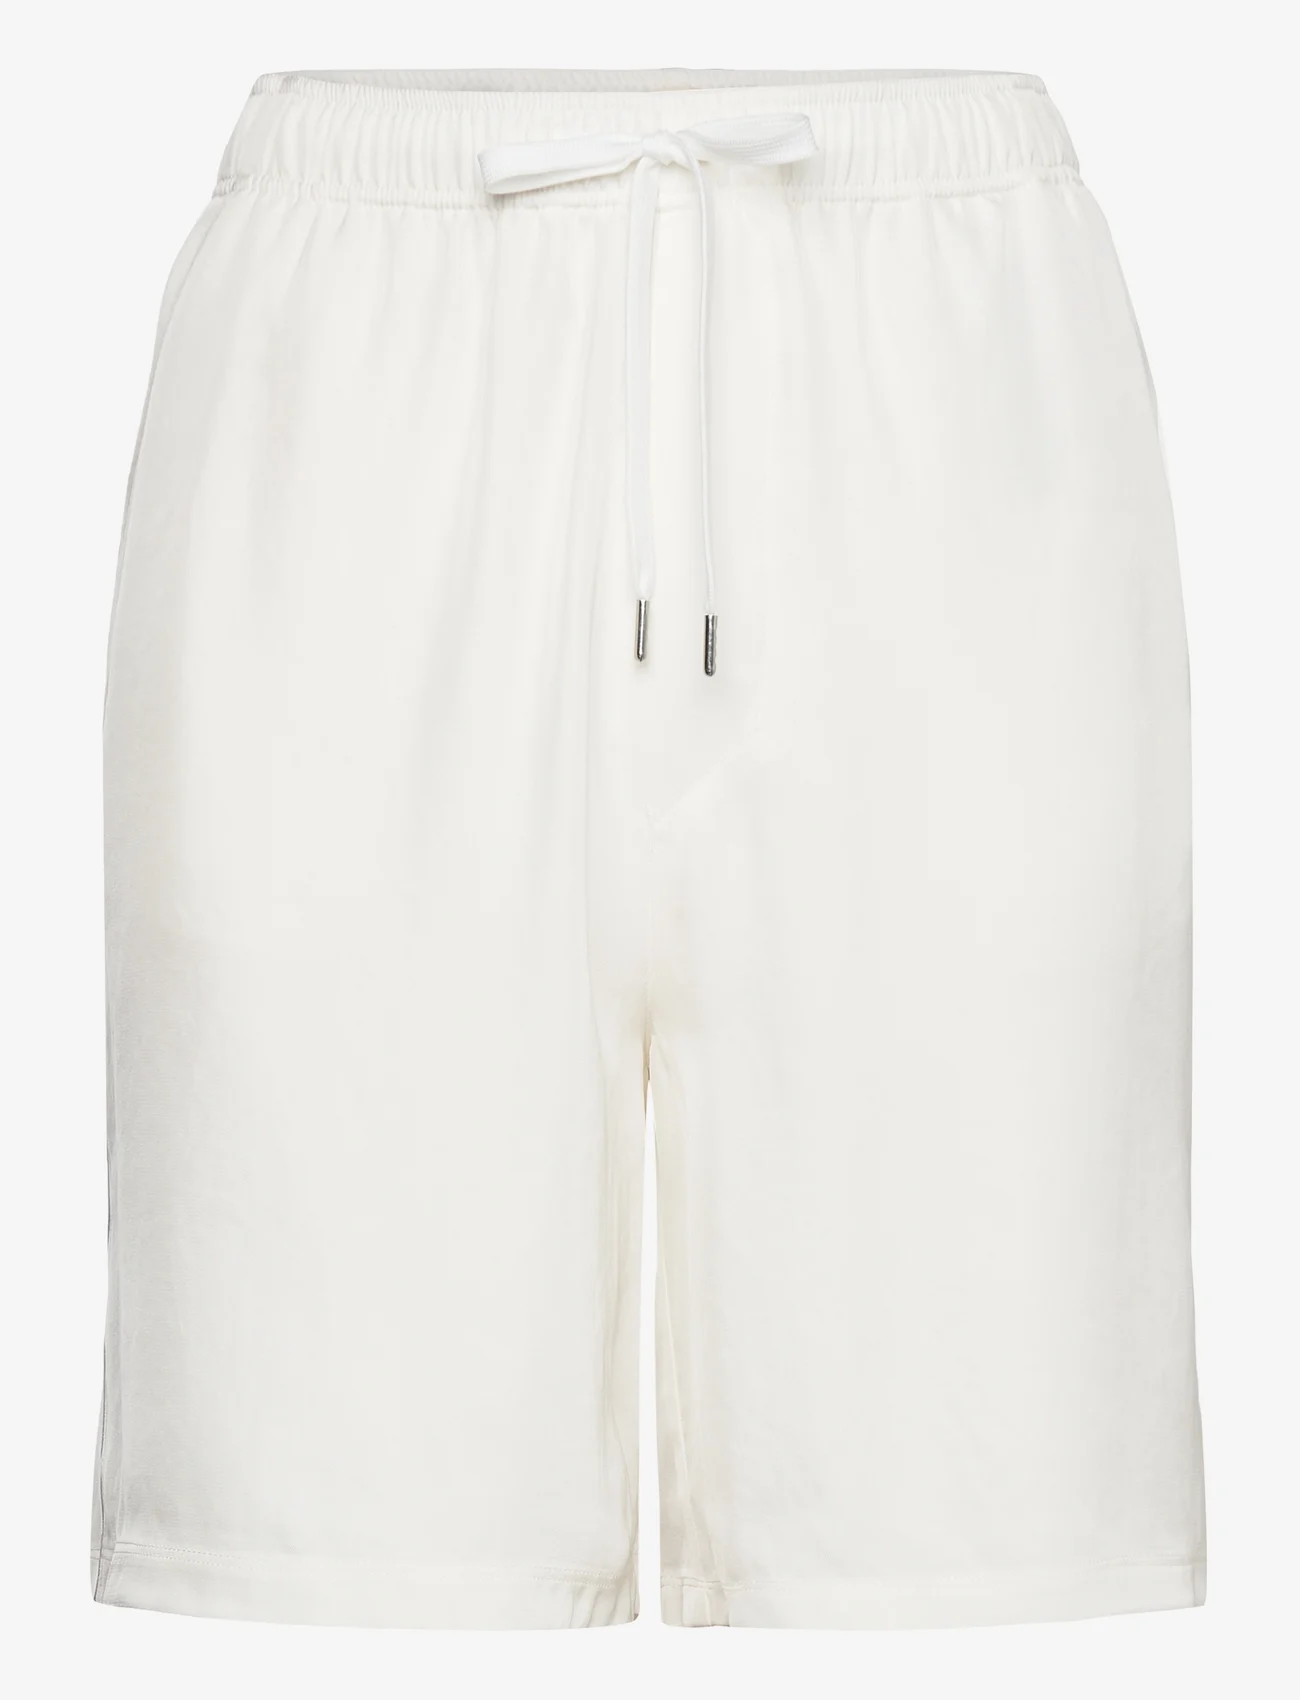 Filippa K - Twill Piped Short - casual shorts - white chal - 0